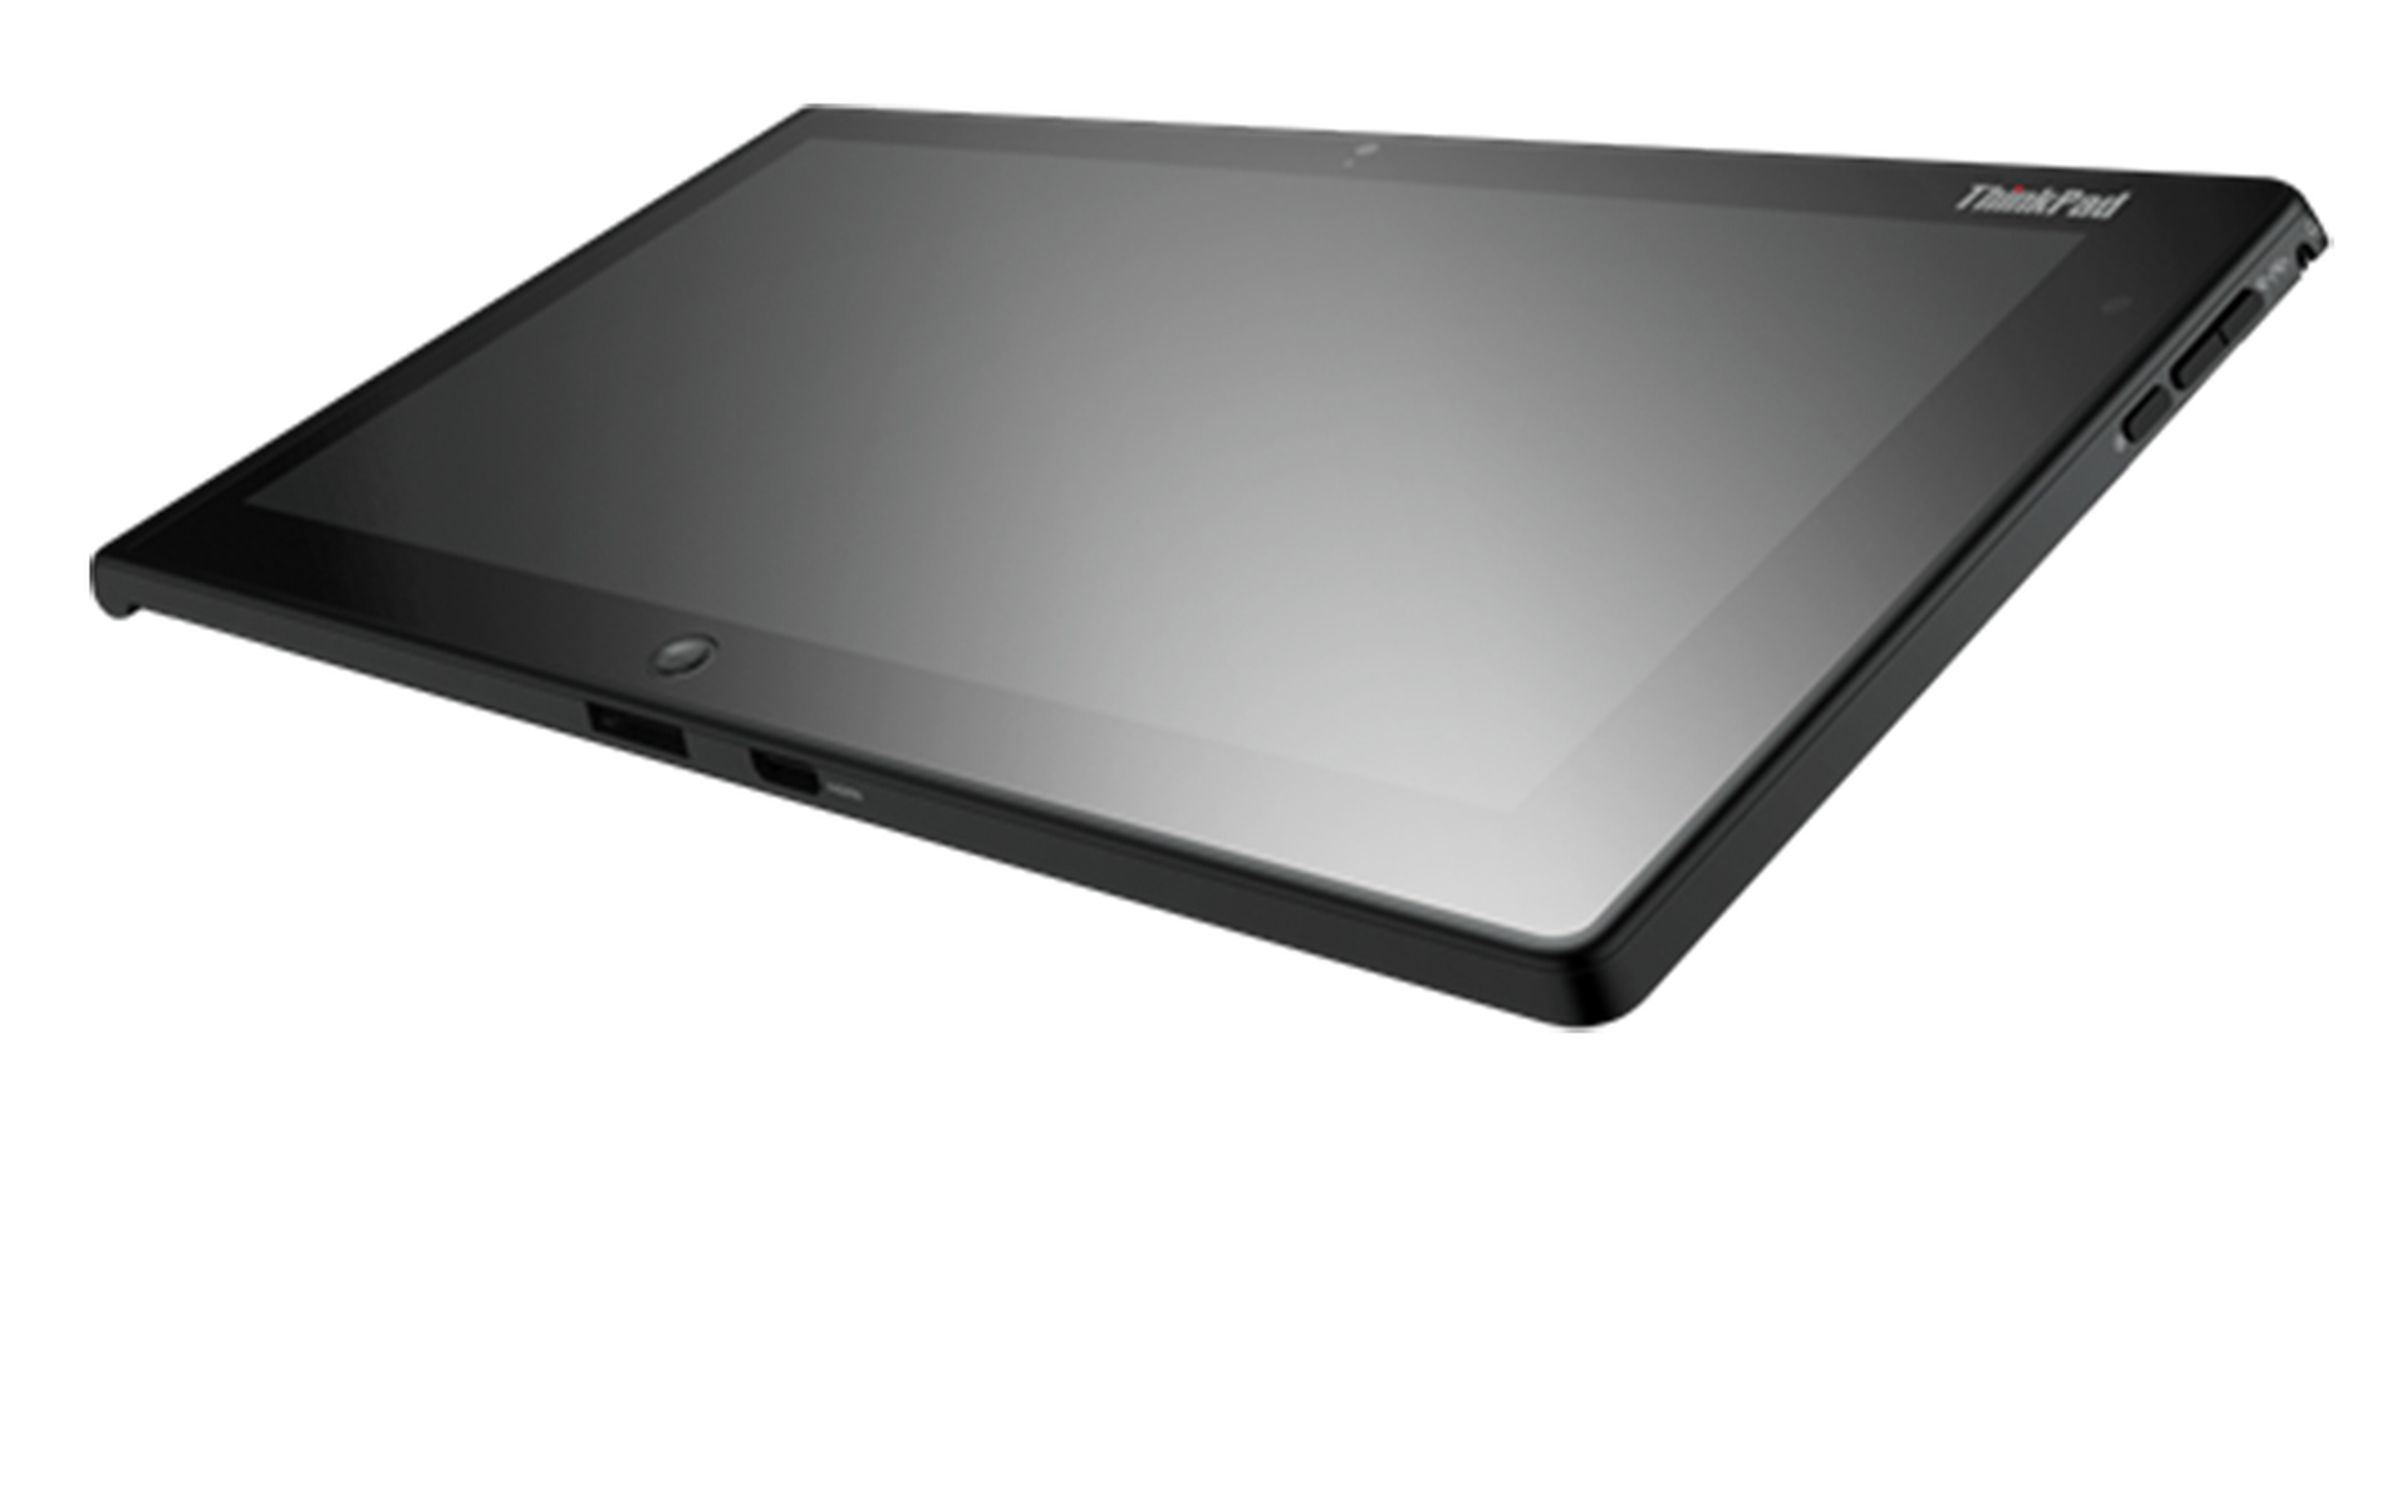 Lenovo ThinkPad Tablet 2 press pictures